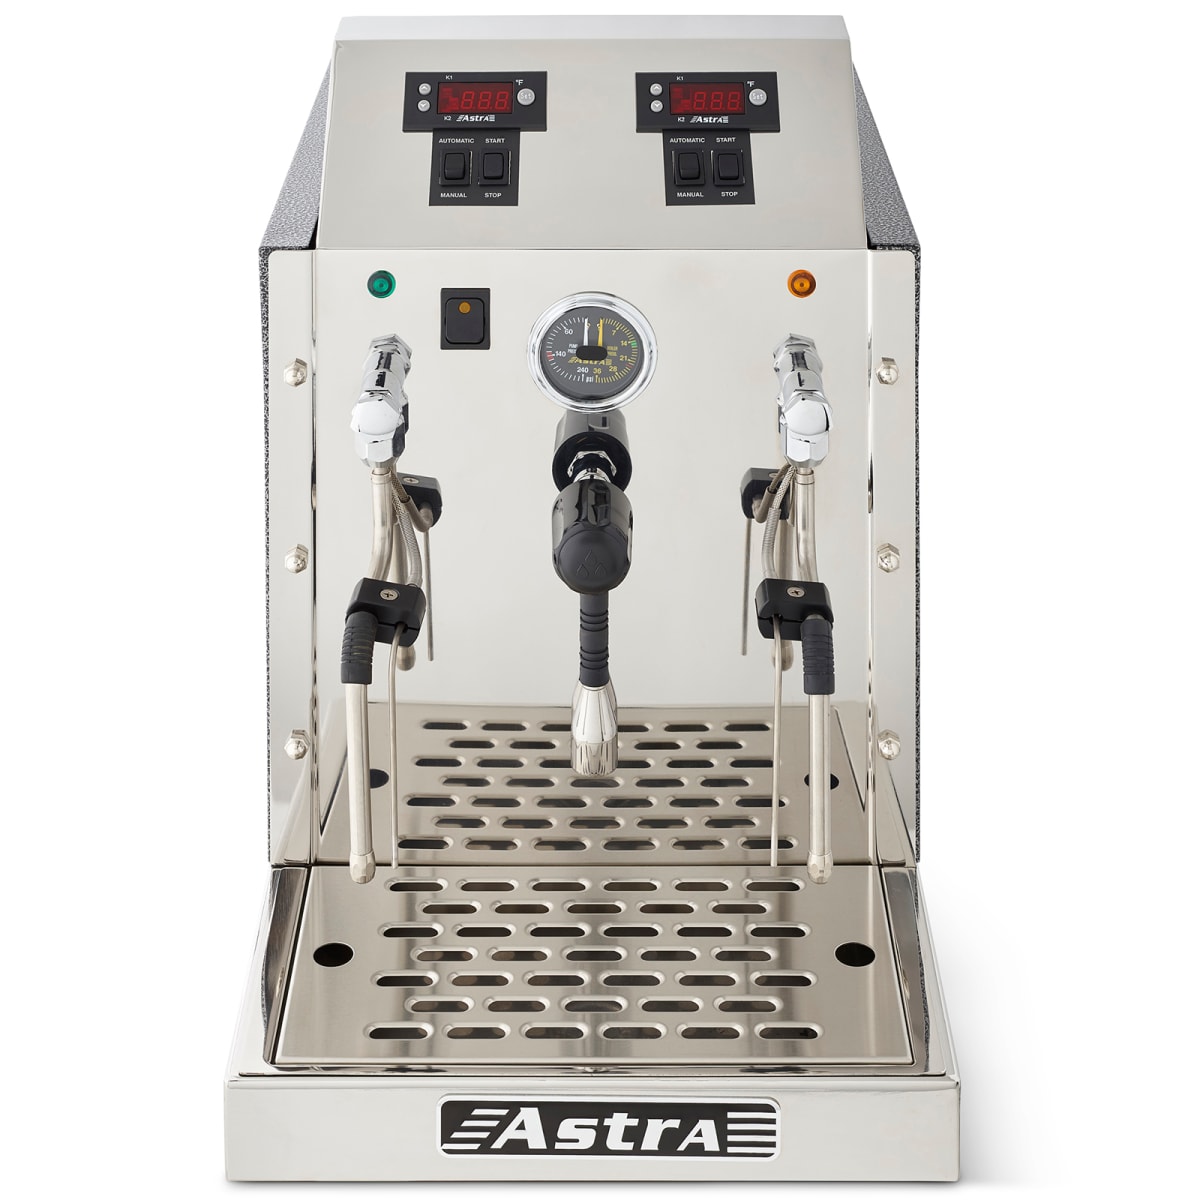 Free Shipping! Astra STA1300 Automatic Steamer